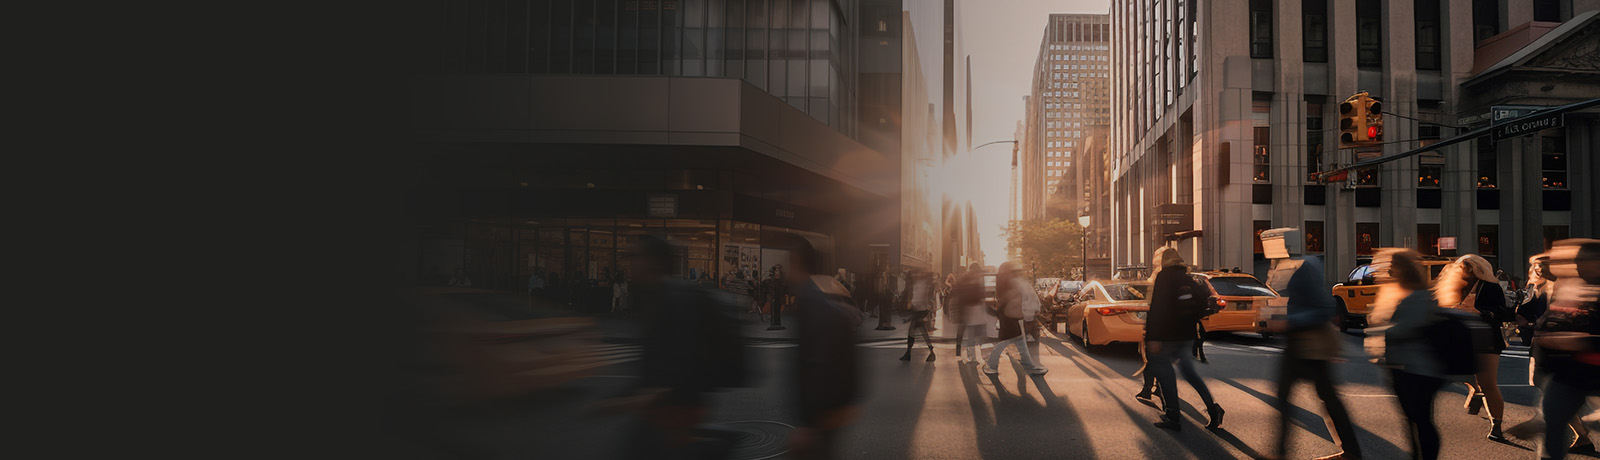 Light filtering through a busy pedestrian intersection in a city